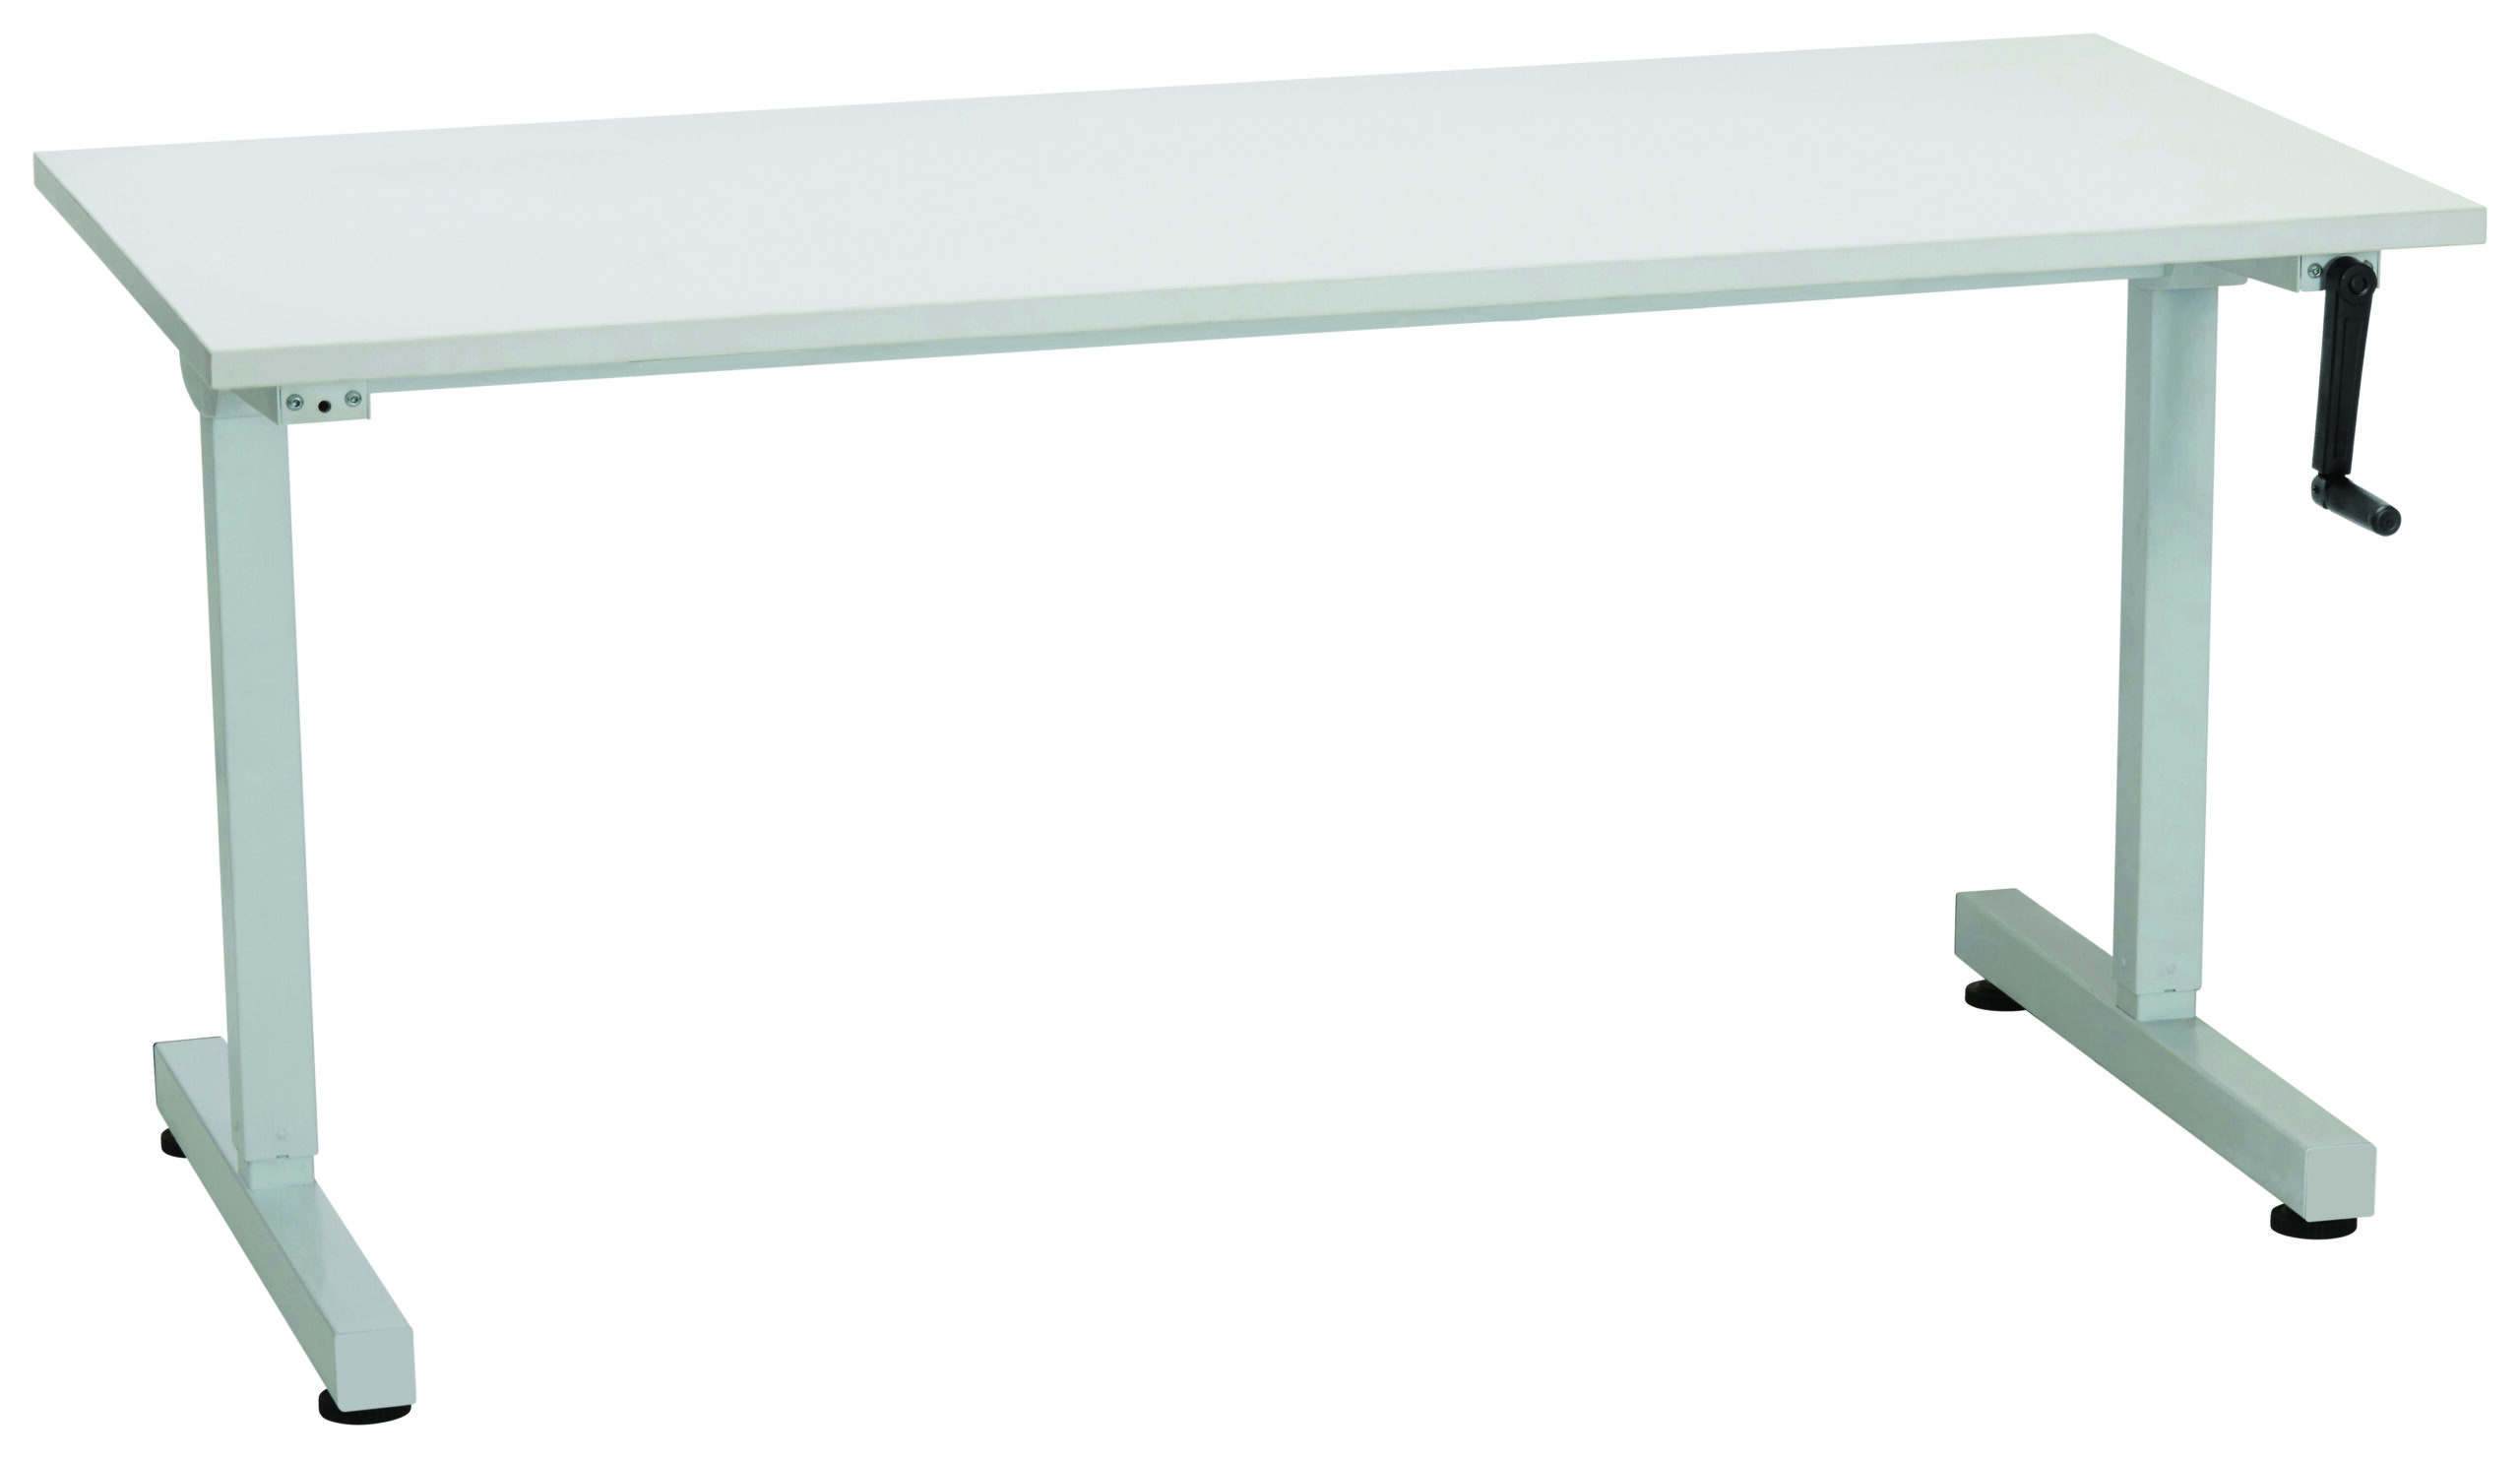 Manual Height Adjustable (700W x 1015H x 1200D)